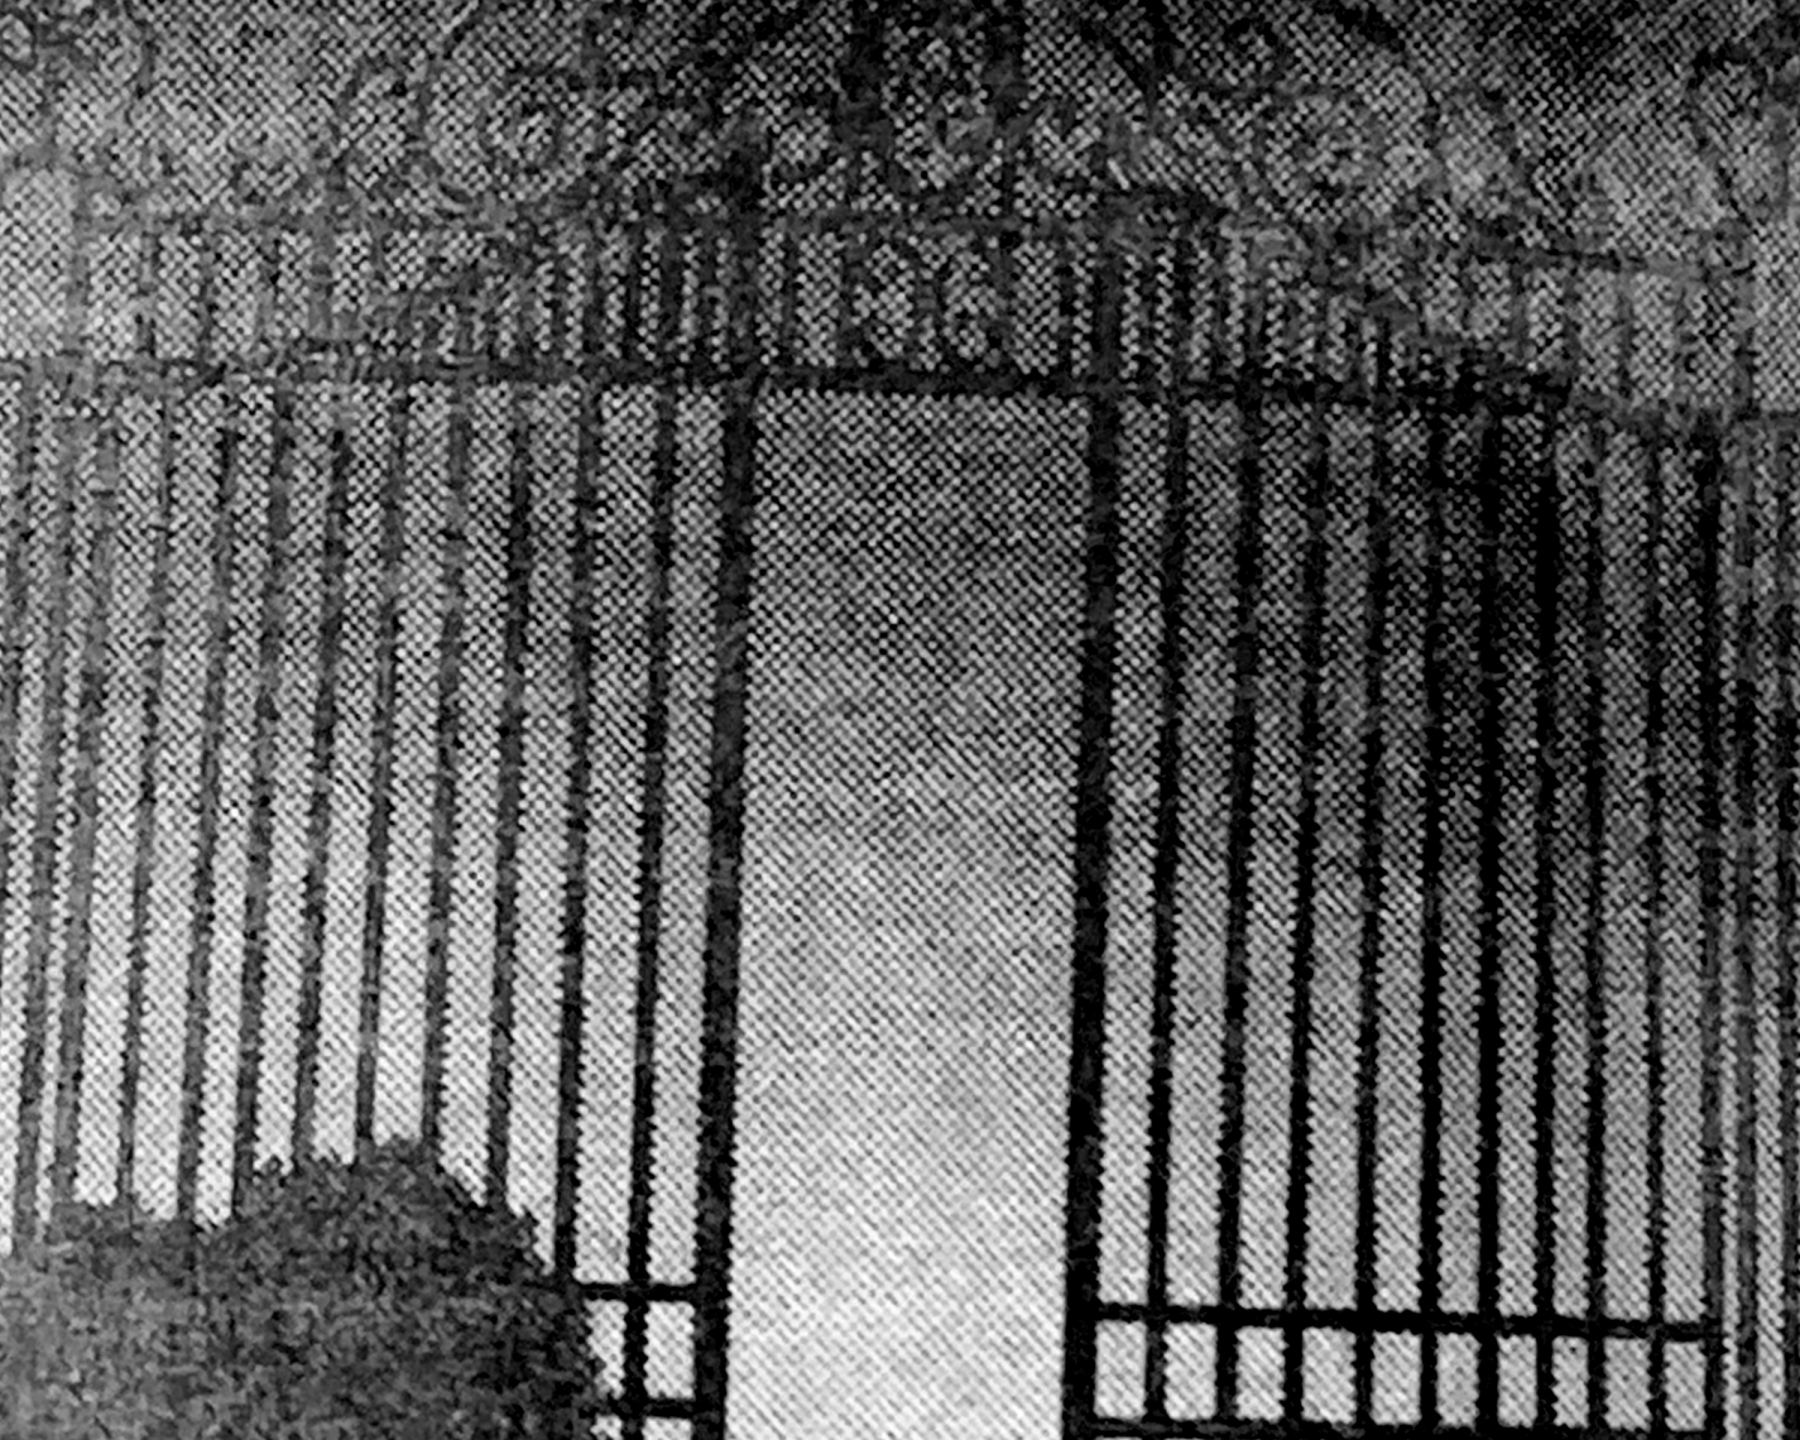 Newspaper clipping of a gate, Notebook, Fall 1984